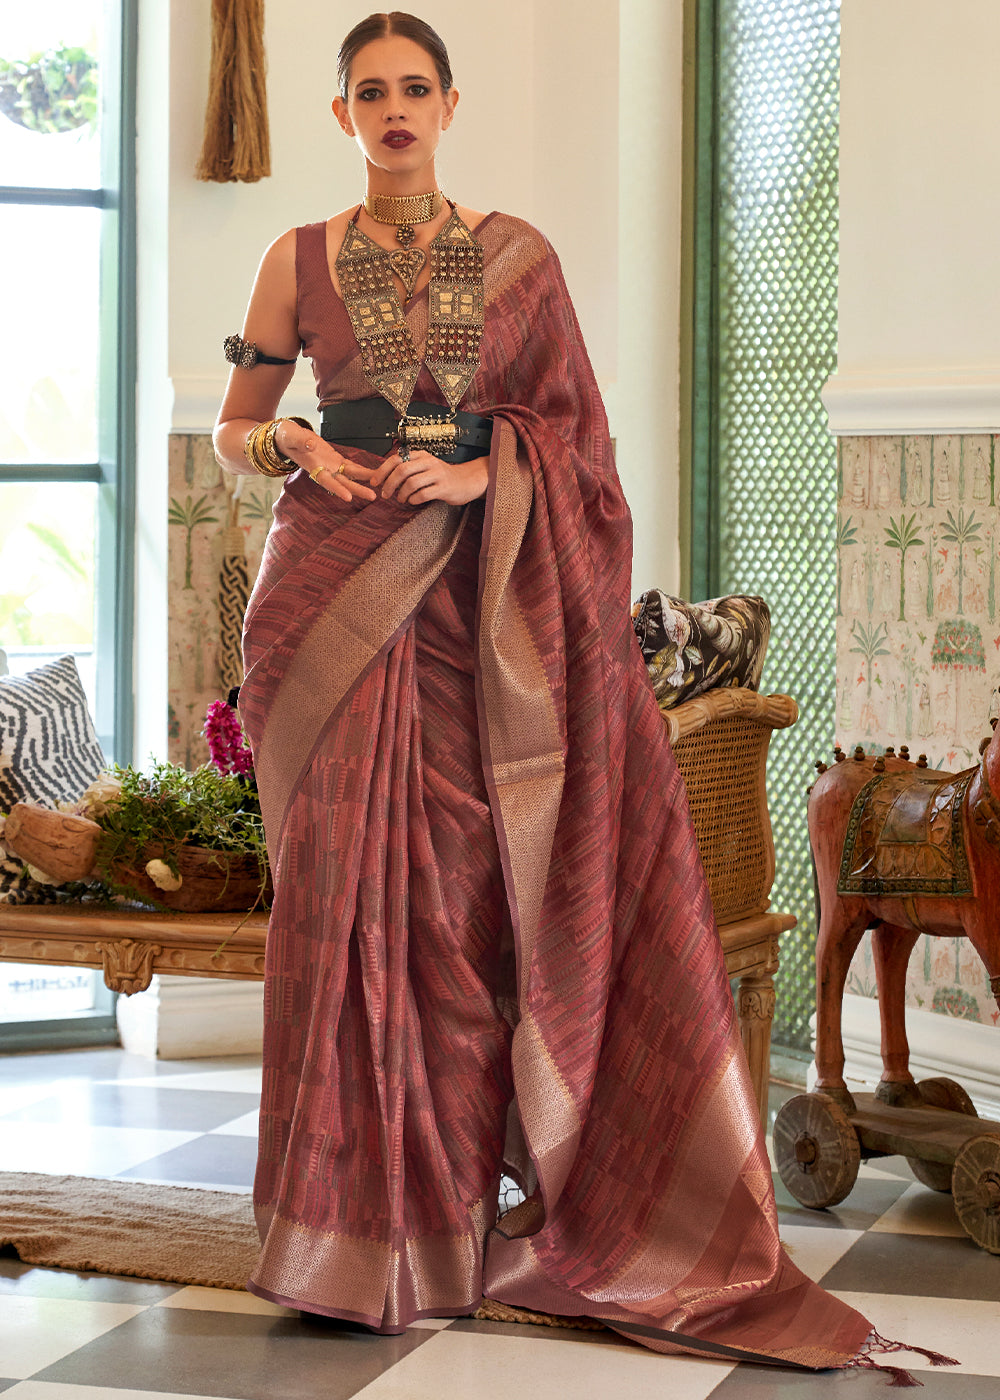 Step into a World of Grace and Elegance with the Plum Violet Organza Saree